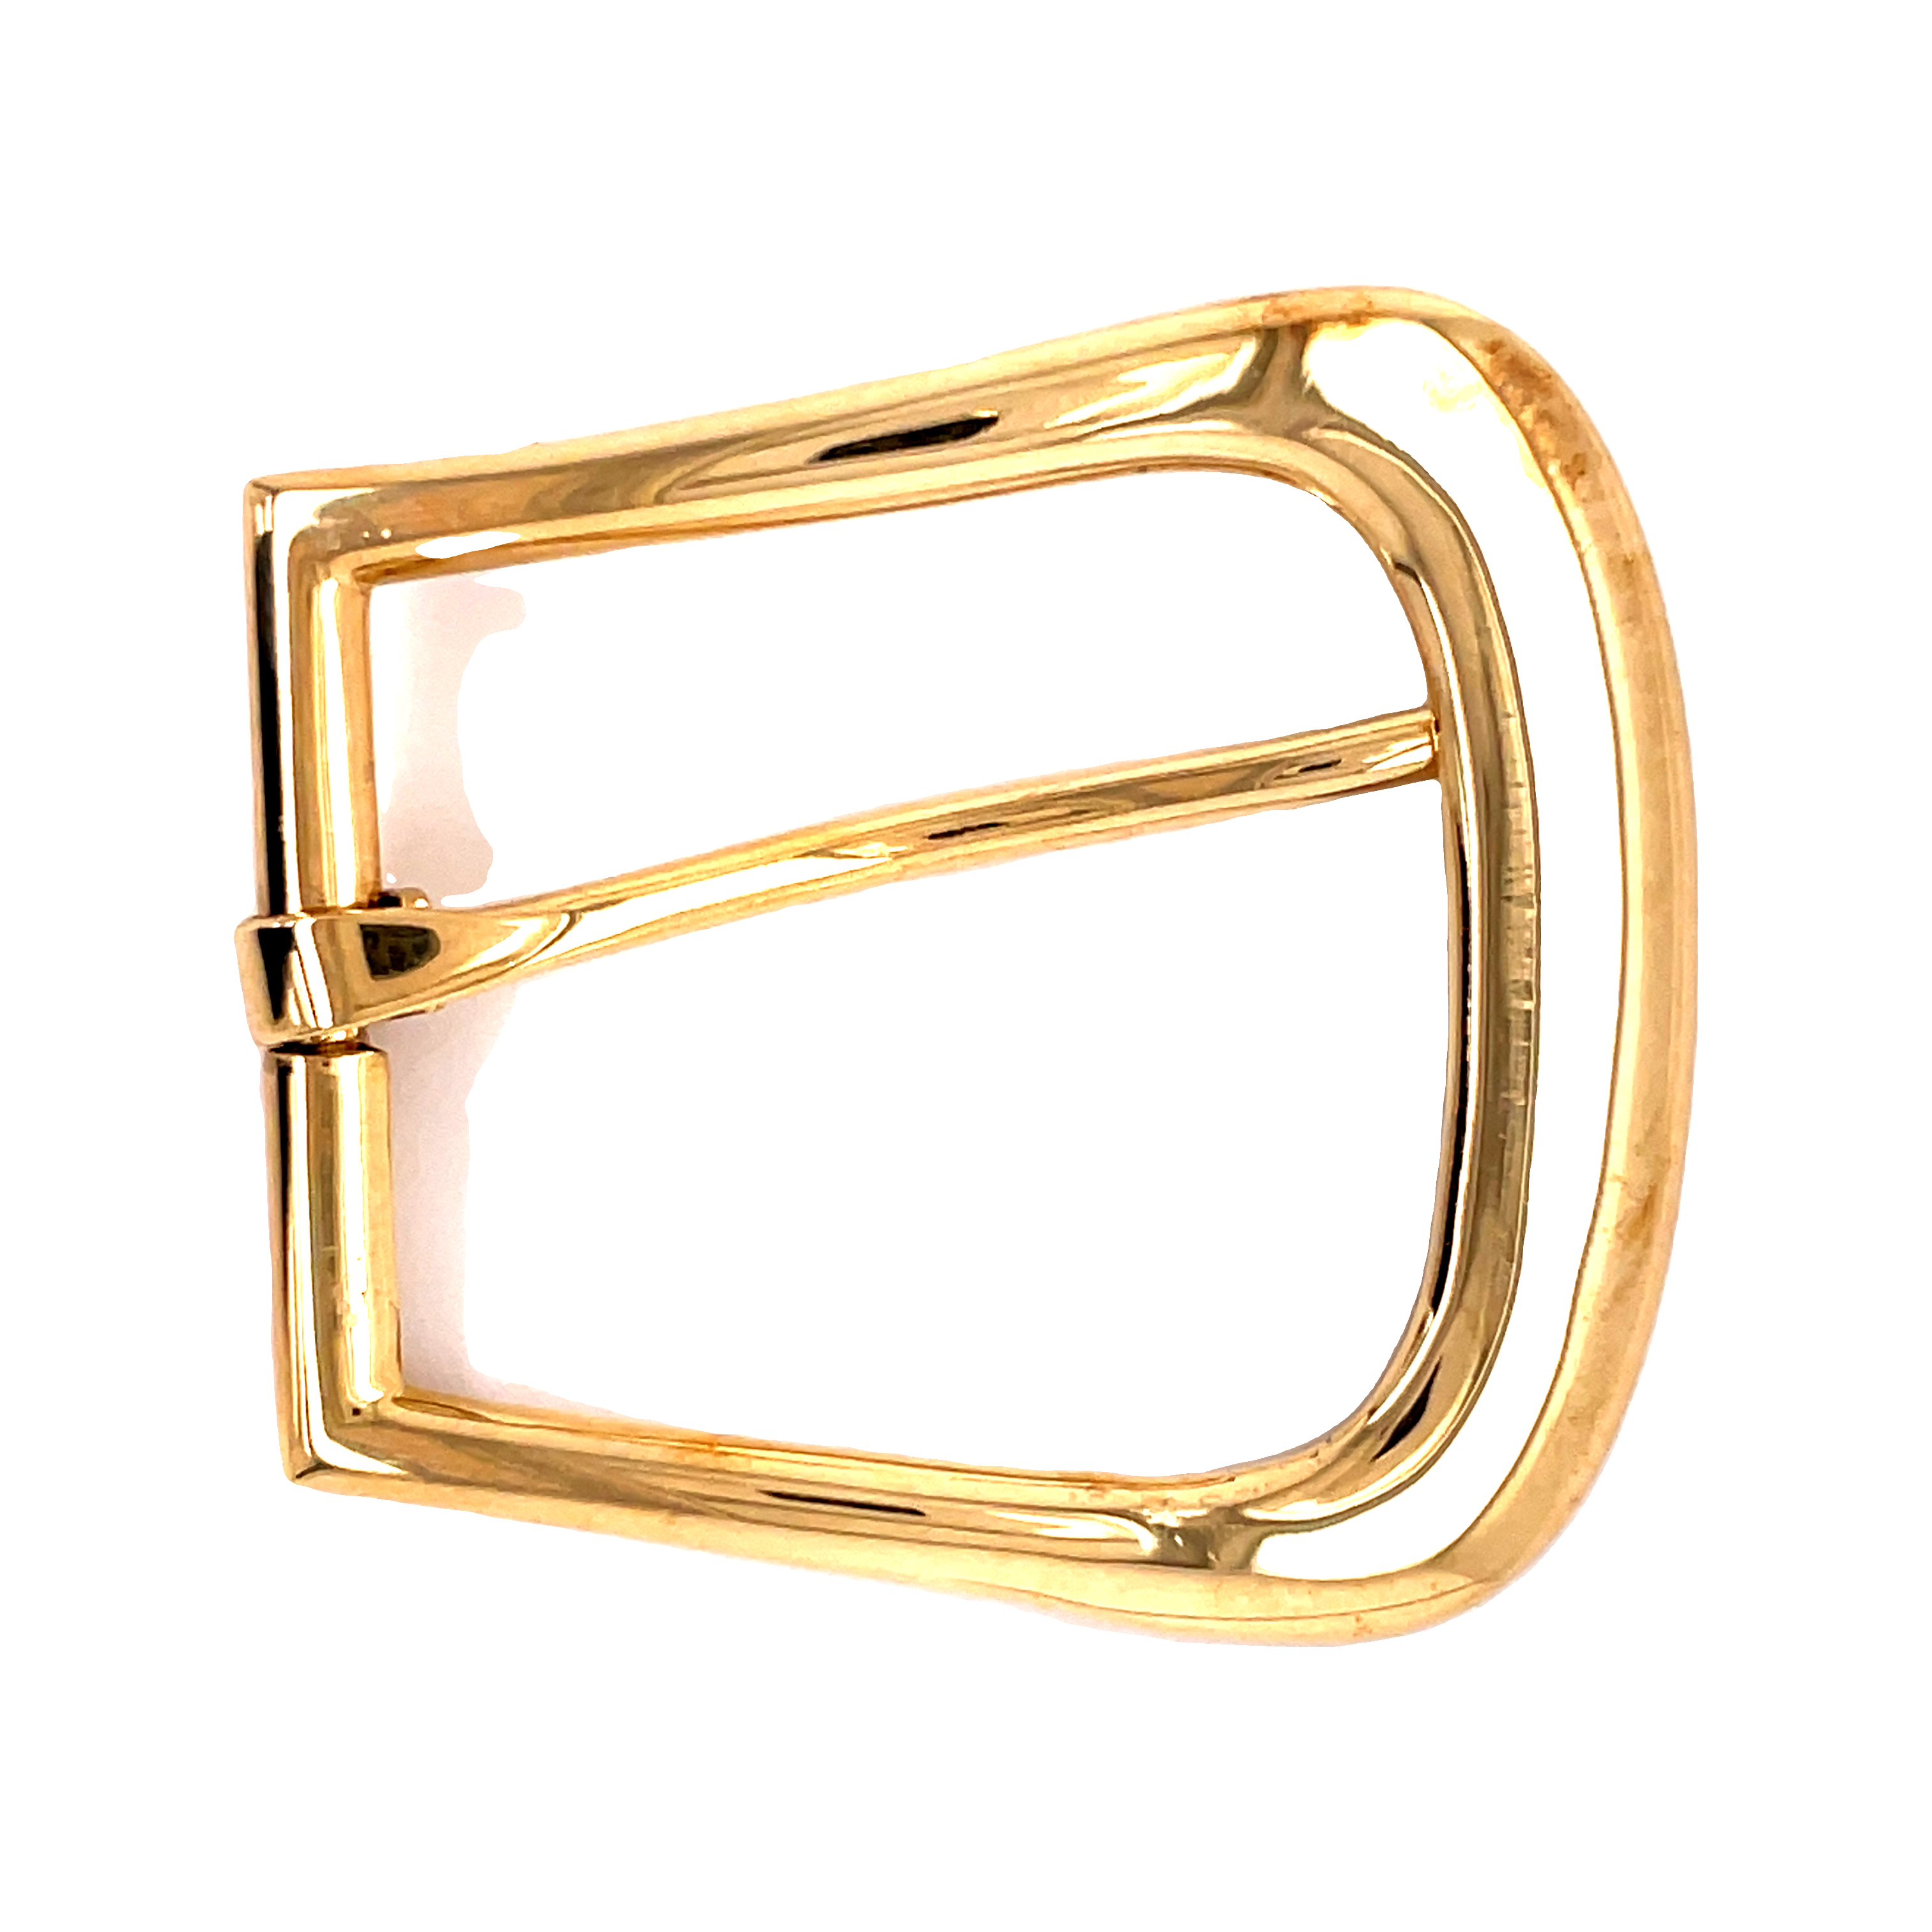 Antique Tiffany & Co Yellow Gold Belt Buckle – SouthMiamiJewelers